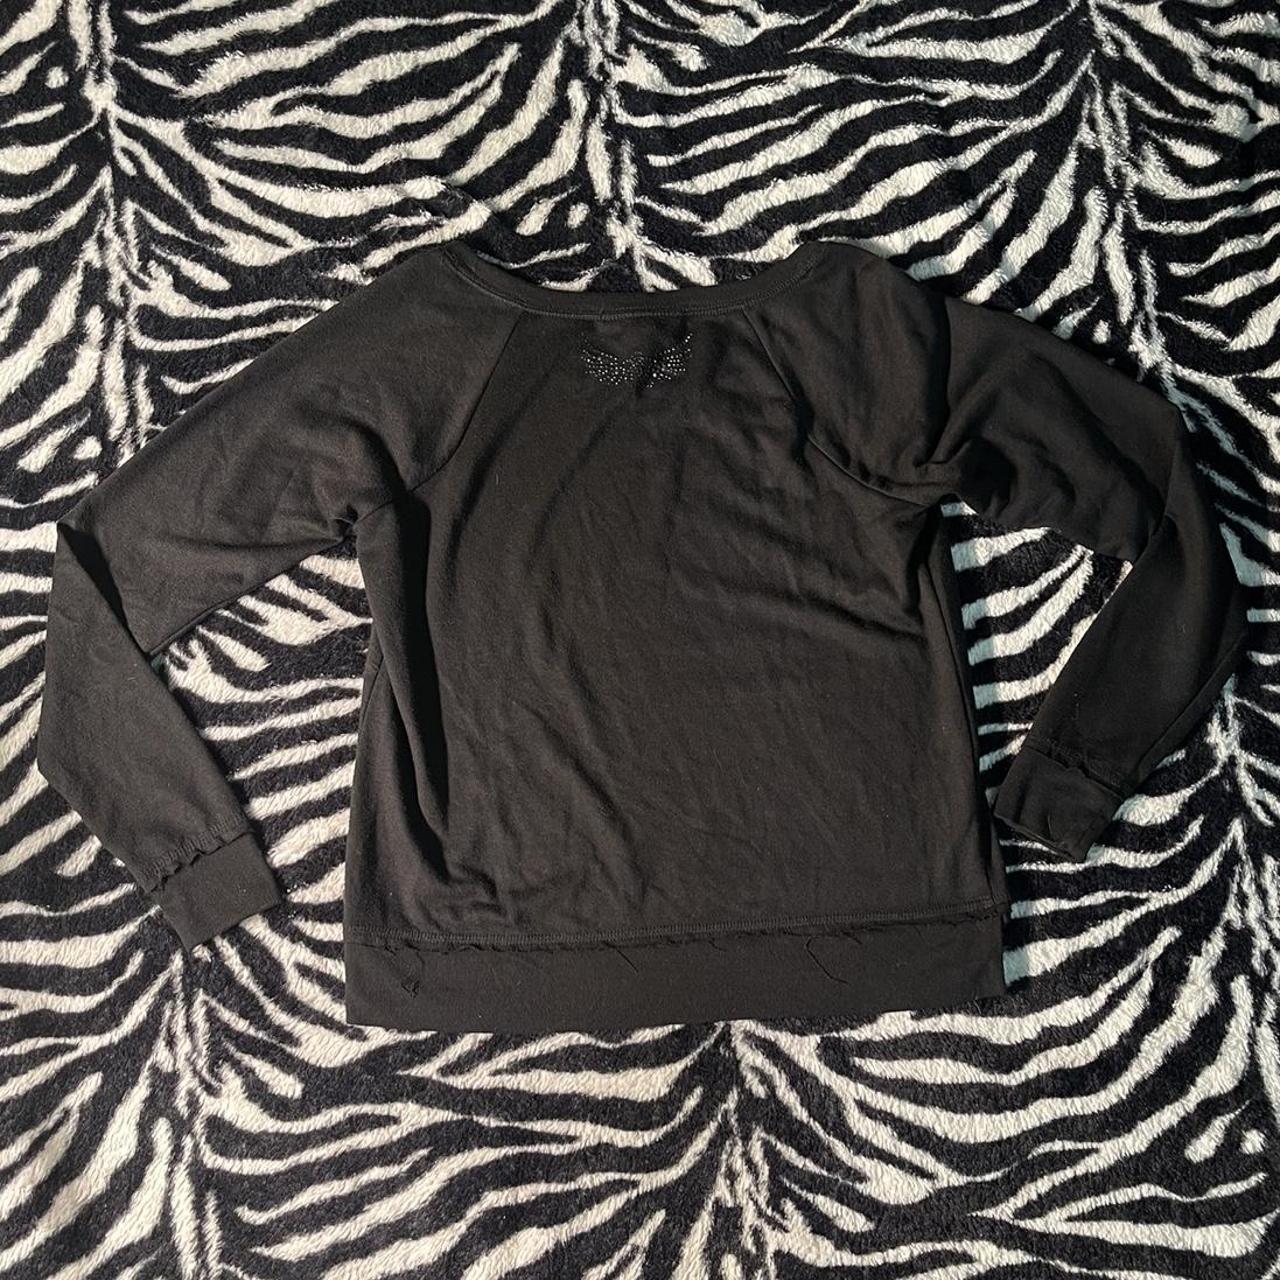 Rock and Republic Women's Black and Grey Shirt (2)